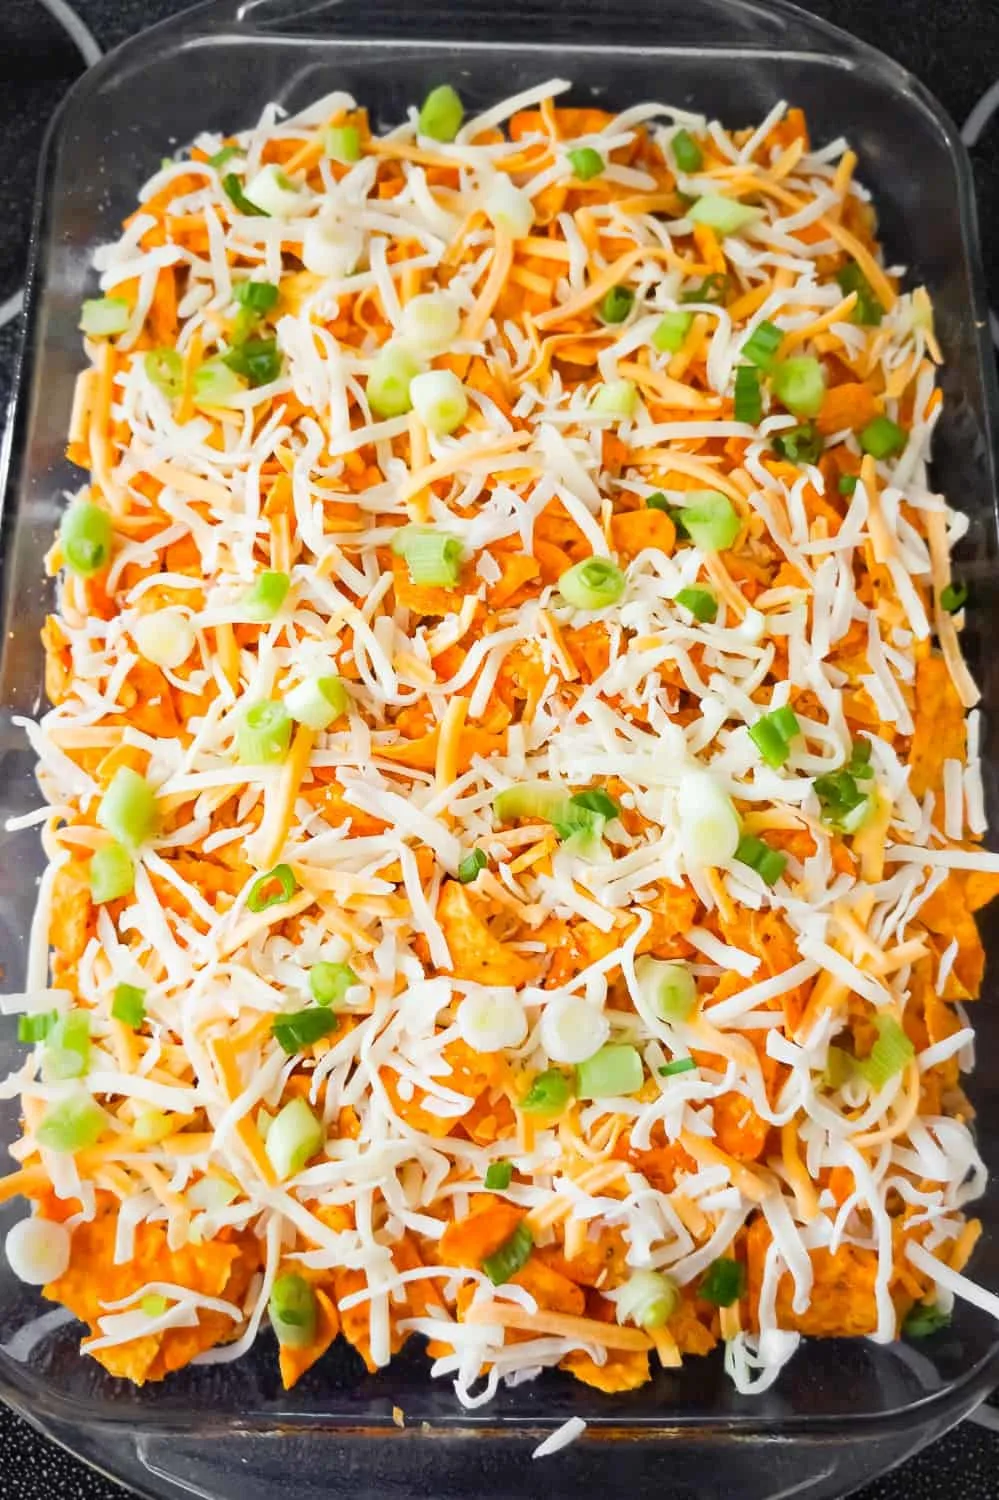 shredded cheese and chopped green onions on top of crumbled Doritos